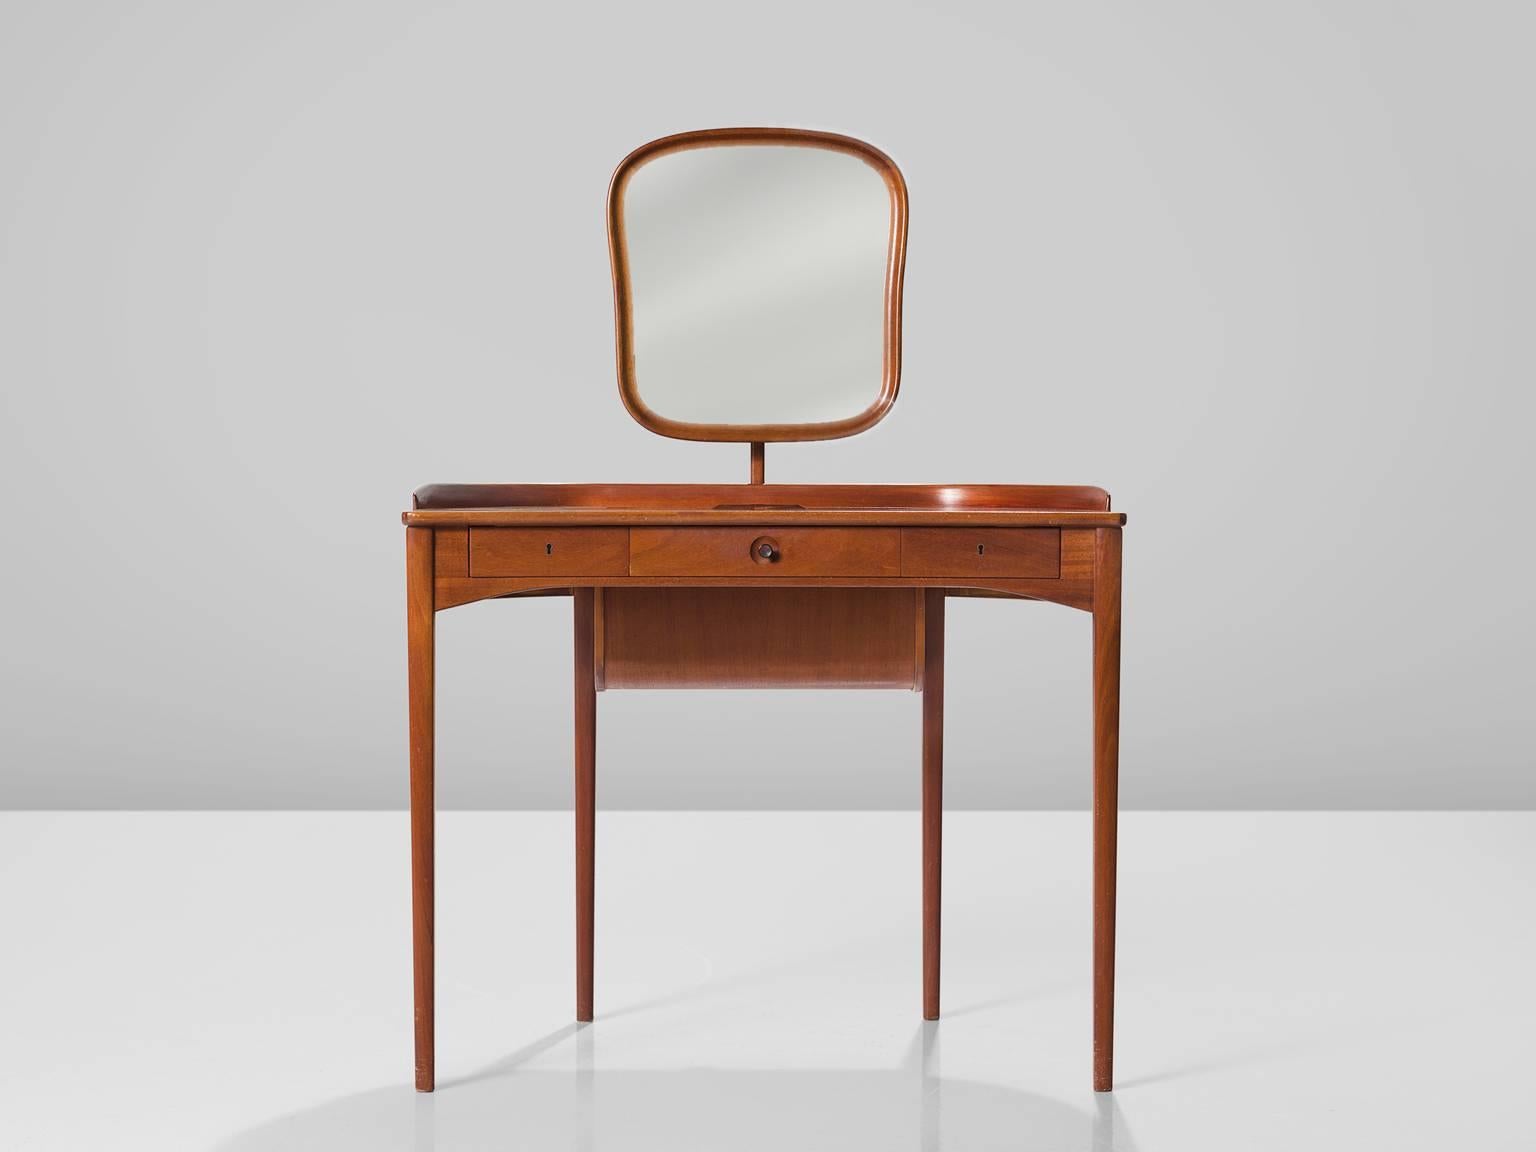 Vanity table in teak with mirror, Italy, 1950s.

This small vanity table with organic mirror is supported by a delicate table with four cylindrical legs. The table has a drawer in the middle and the back legs are placed closer together than the